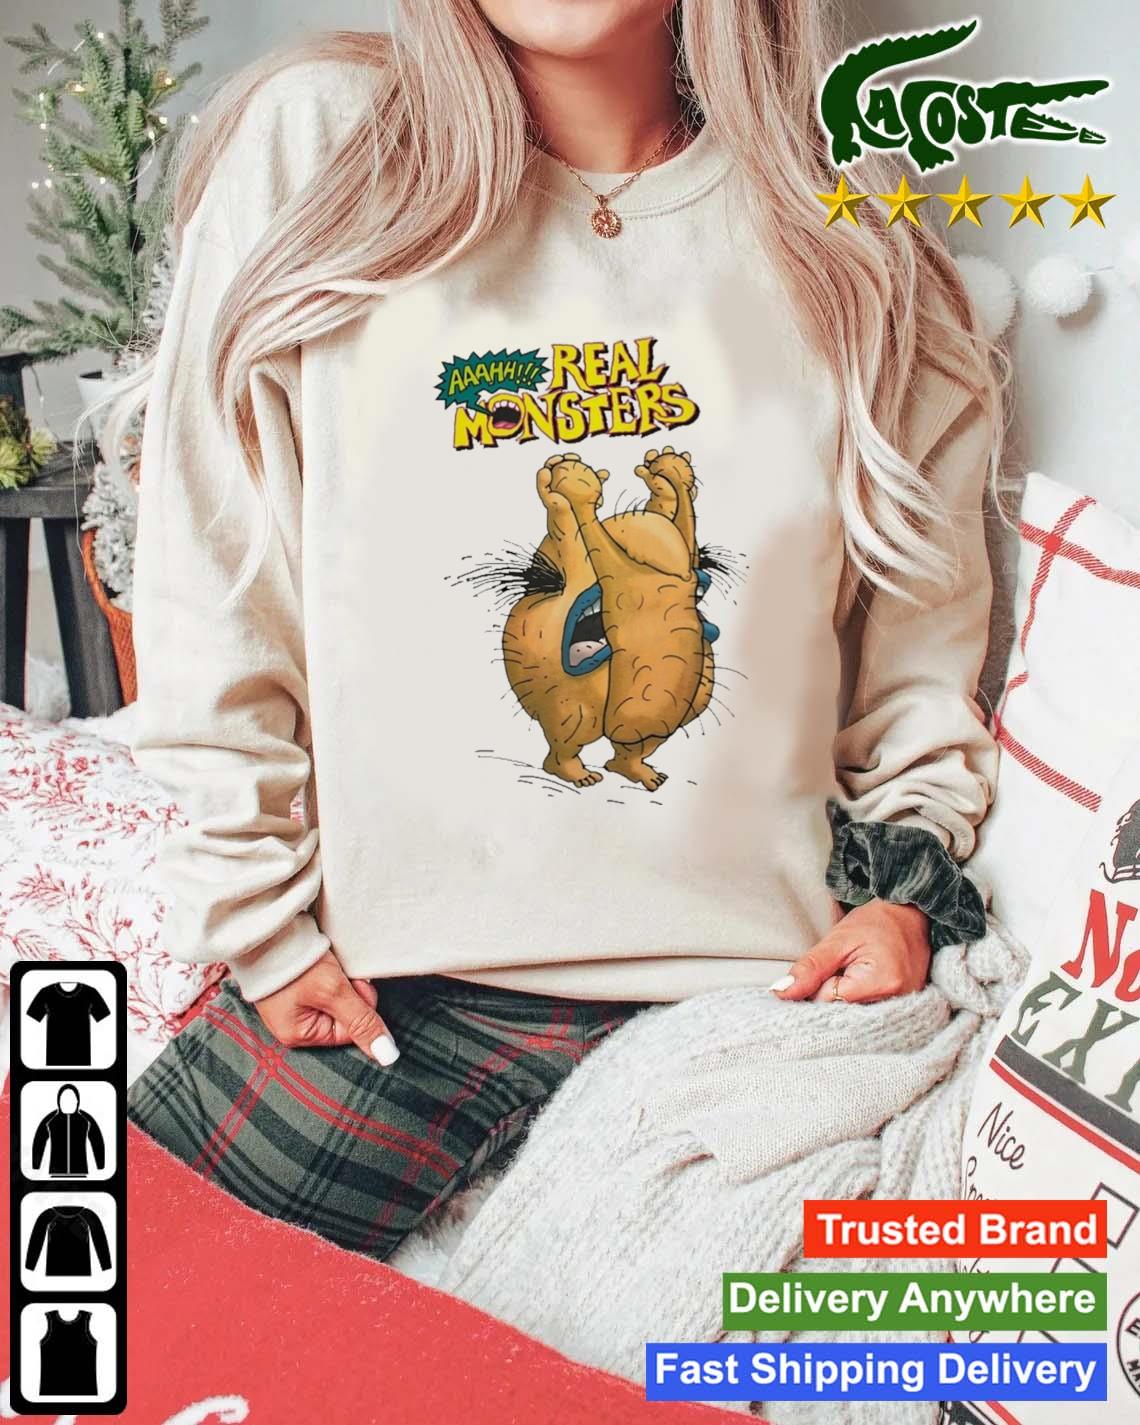 Mull.dog Shop Real Monsters Nick Mullen Sweats Mockup Sweater